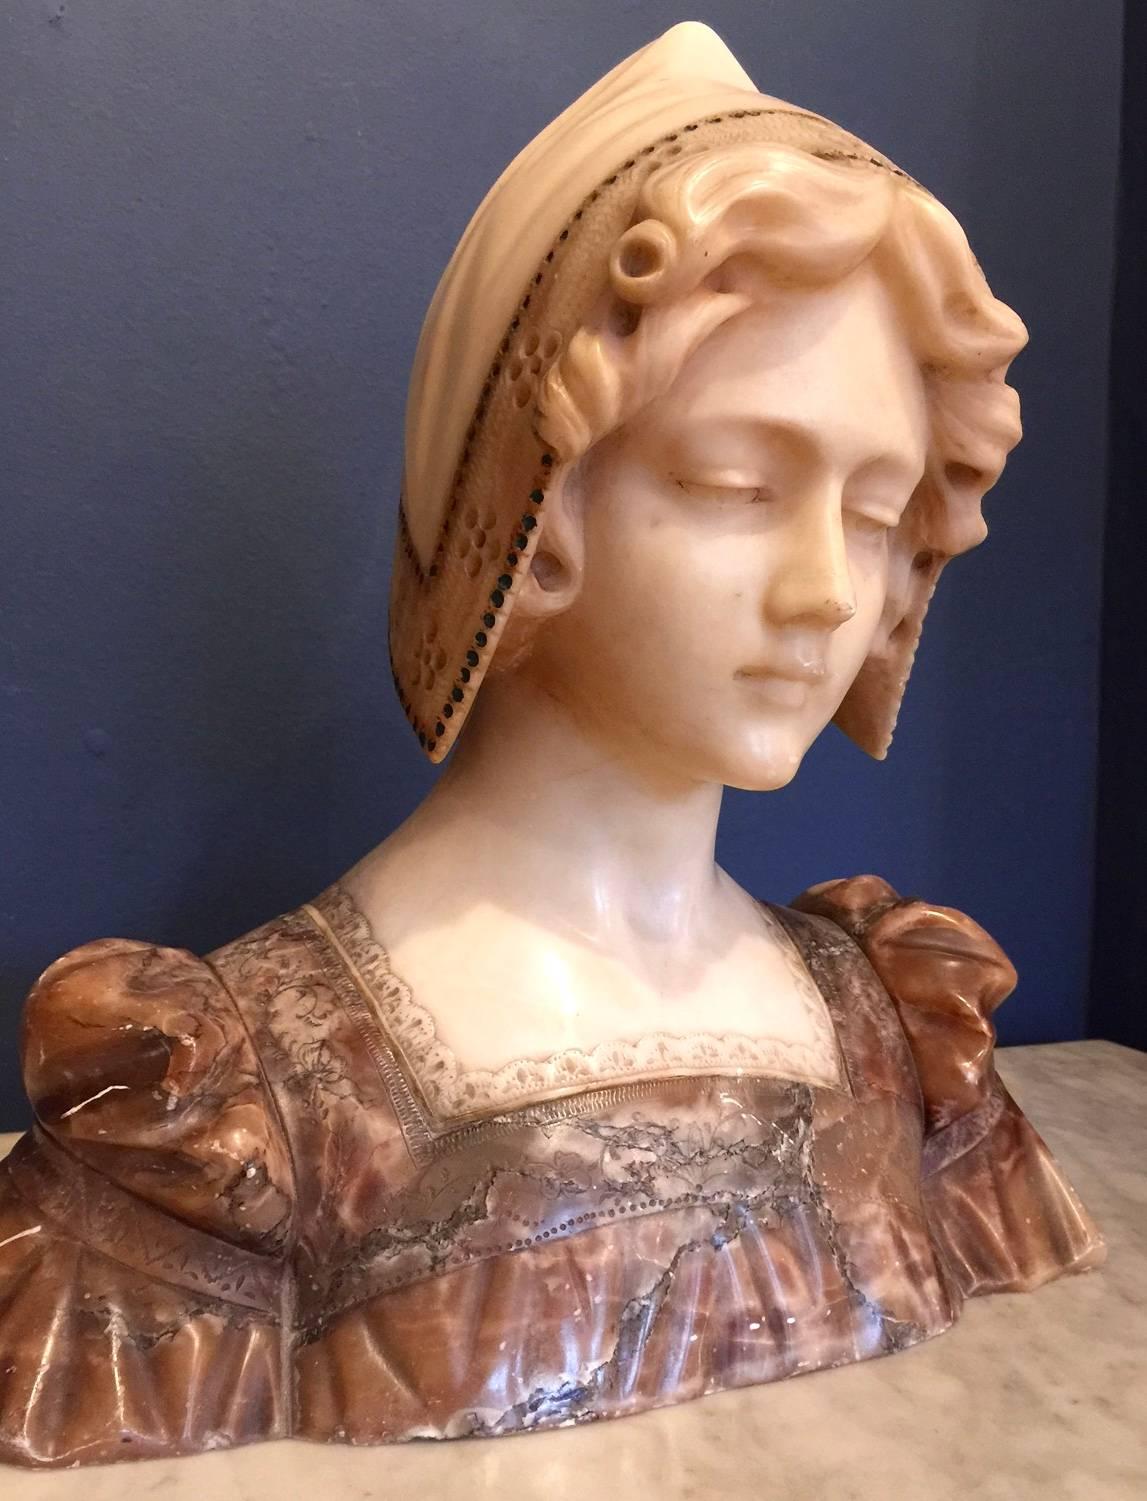 An exquisite Italian alabaster bust of a young maiden wearing a bonnet, with painted highlighted detail. Good contrast of color and fine detail. Beautiful carving to the bonnet and dress especially the lace detail. The dress with its puffed sleeve